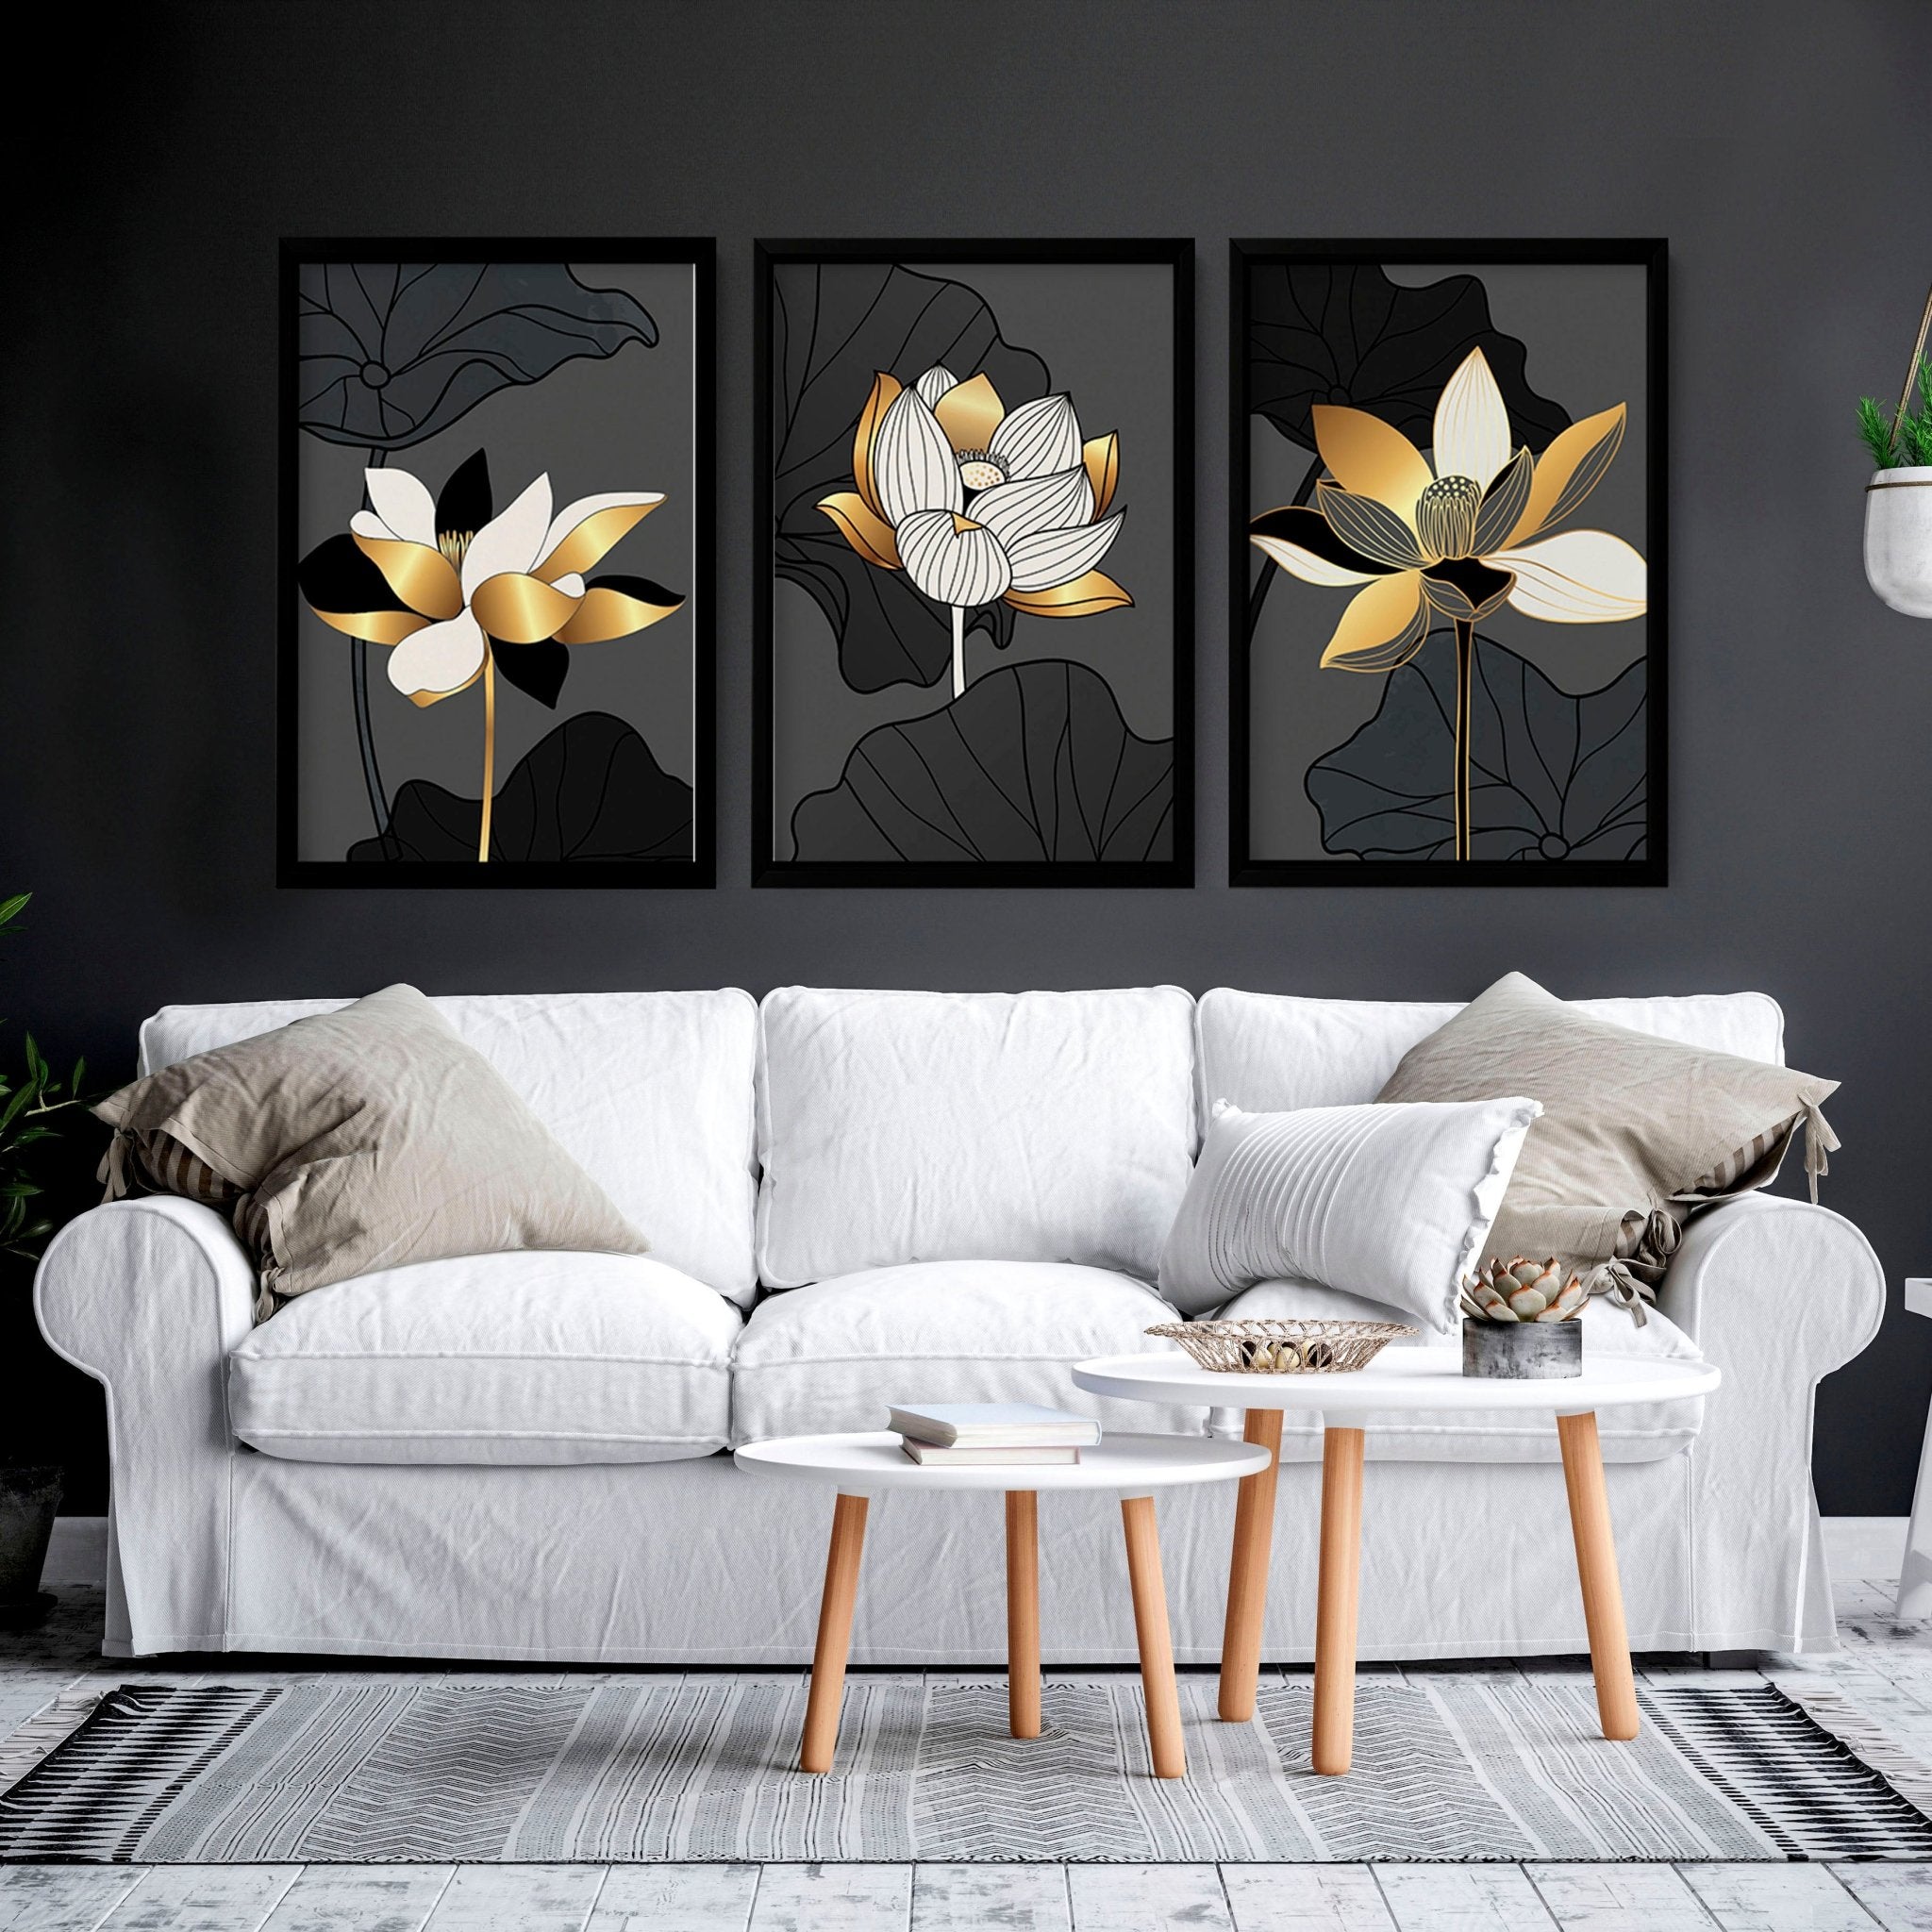 Large wall art for living room | set of 3 wall art prints - About Wall Art